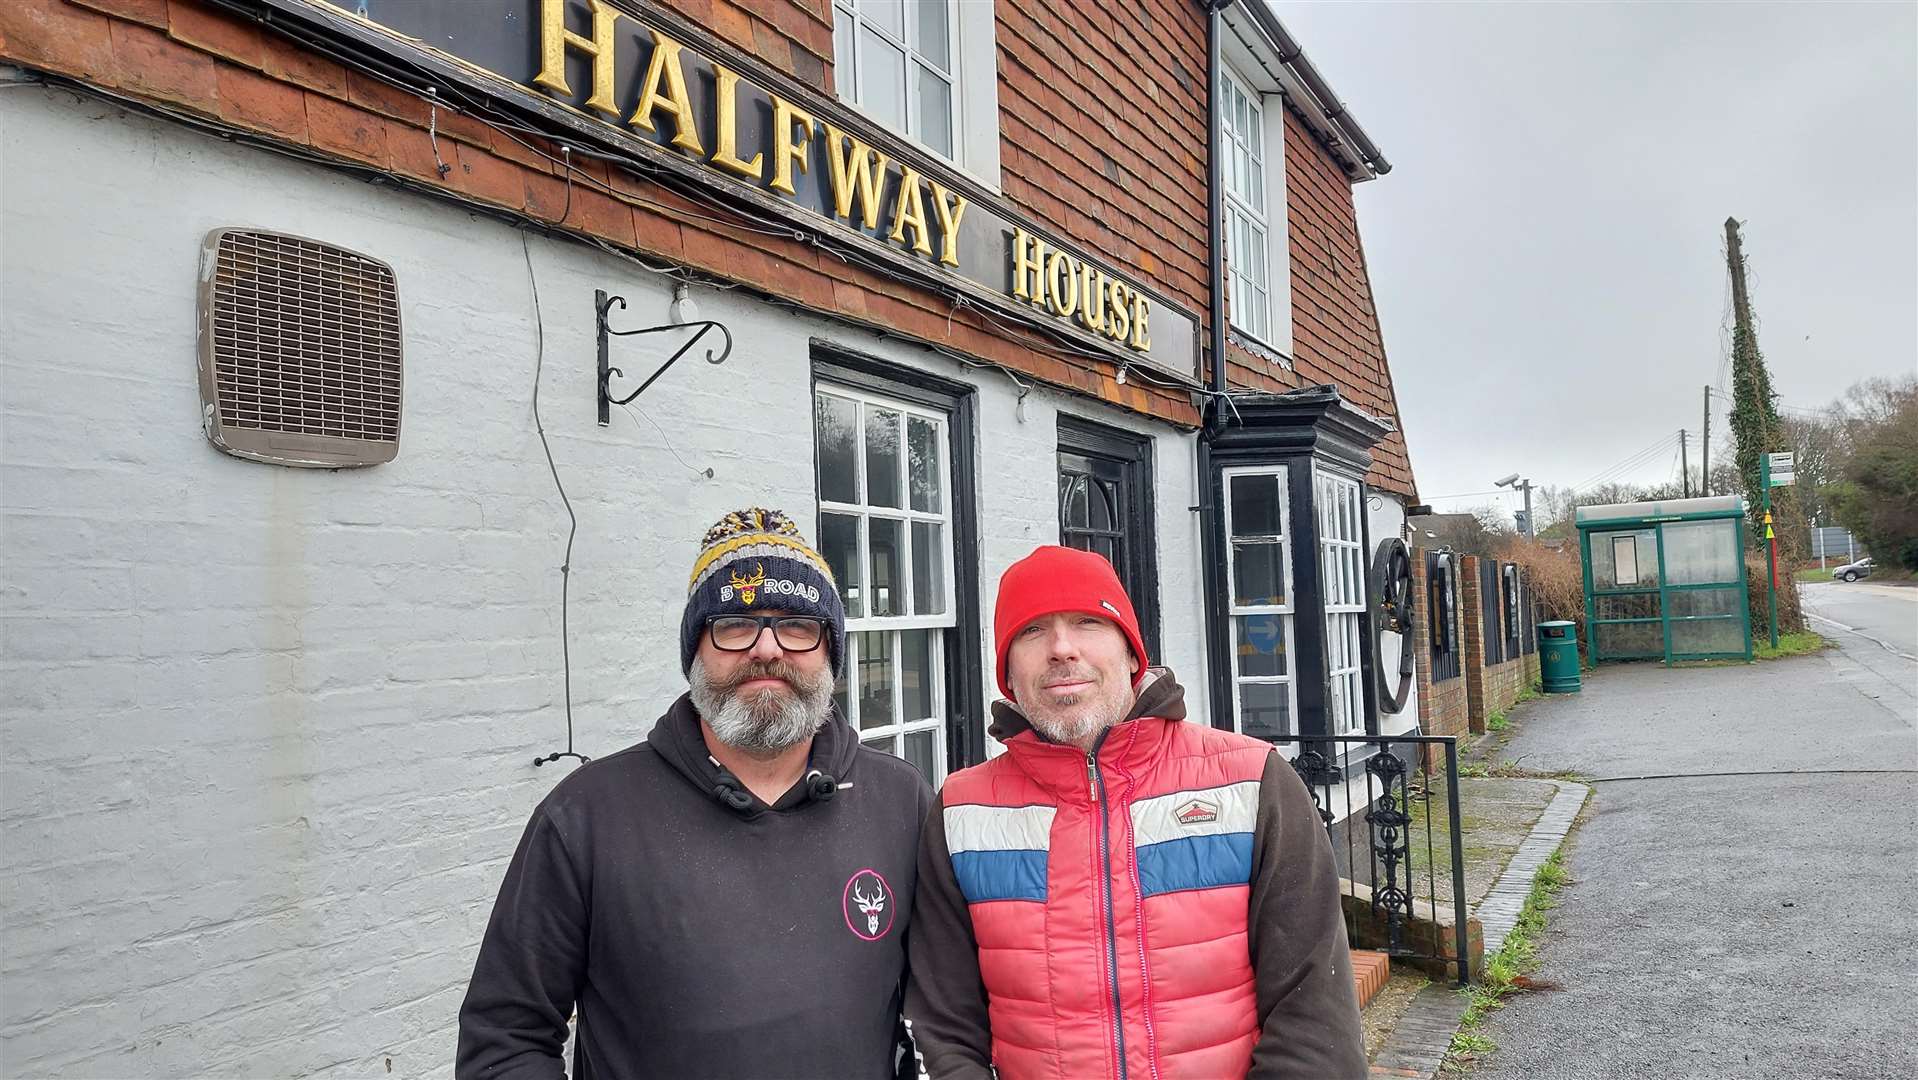 Edd Little and Roger Gray are introducing a motorsport theme to the Halfway House - which will also get a new name